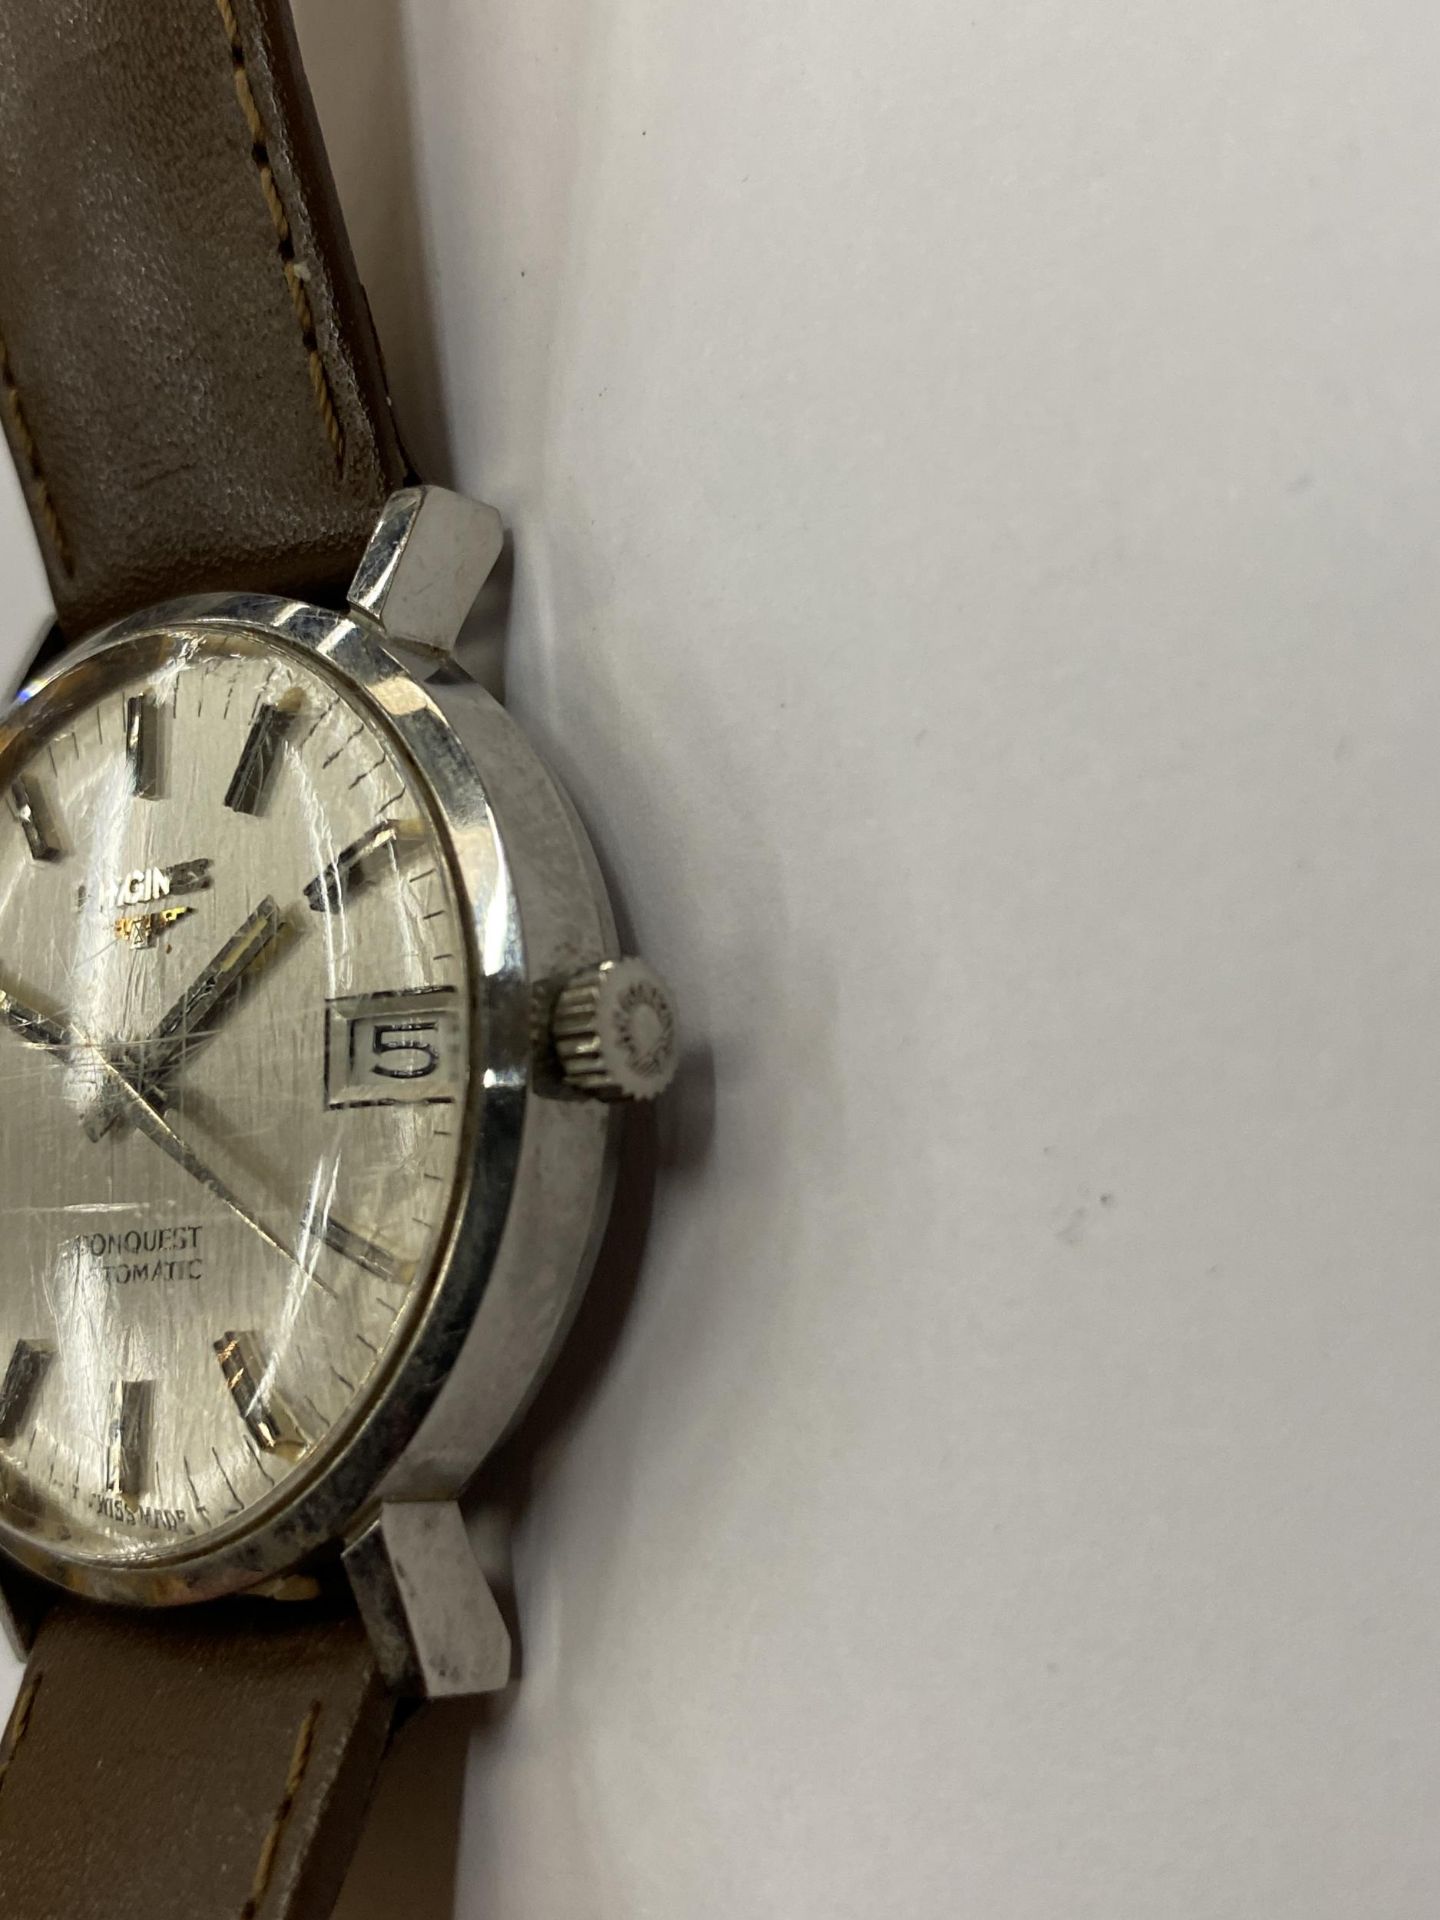 A VINTAGE LONGINES CONQUEST AUTOMATIC WRIST WATCH WITH LEATHER STRAP SEEN WORKING BUT NO WARRANTY - Image 2 of 6